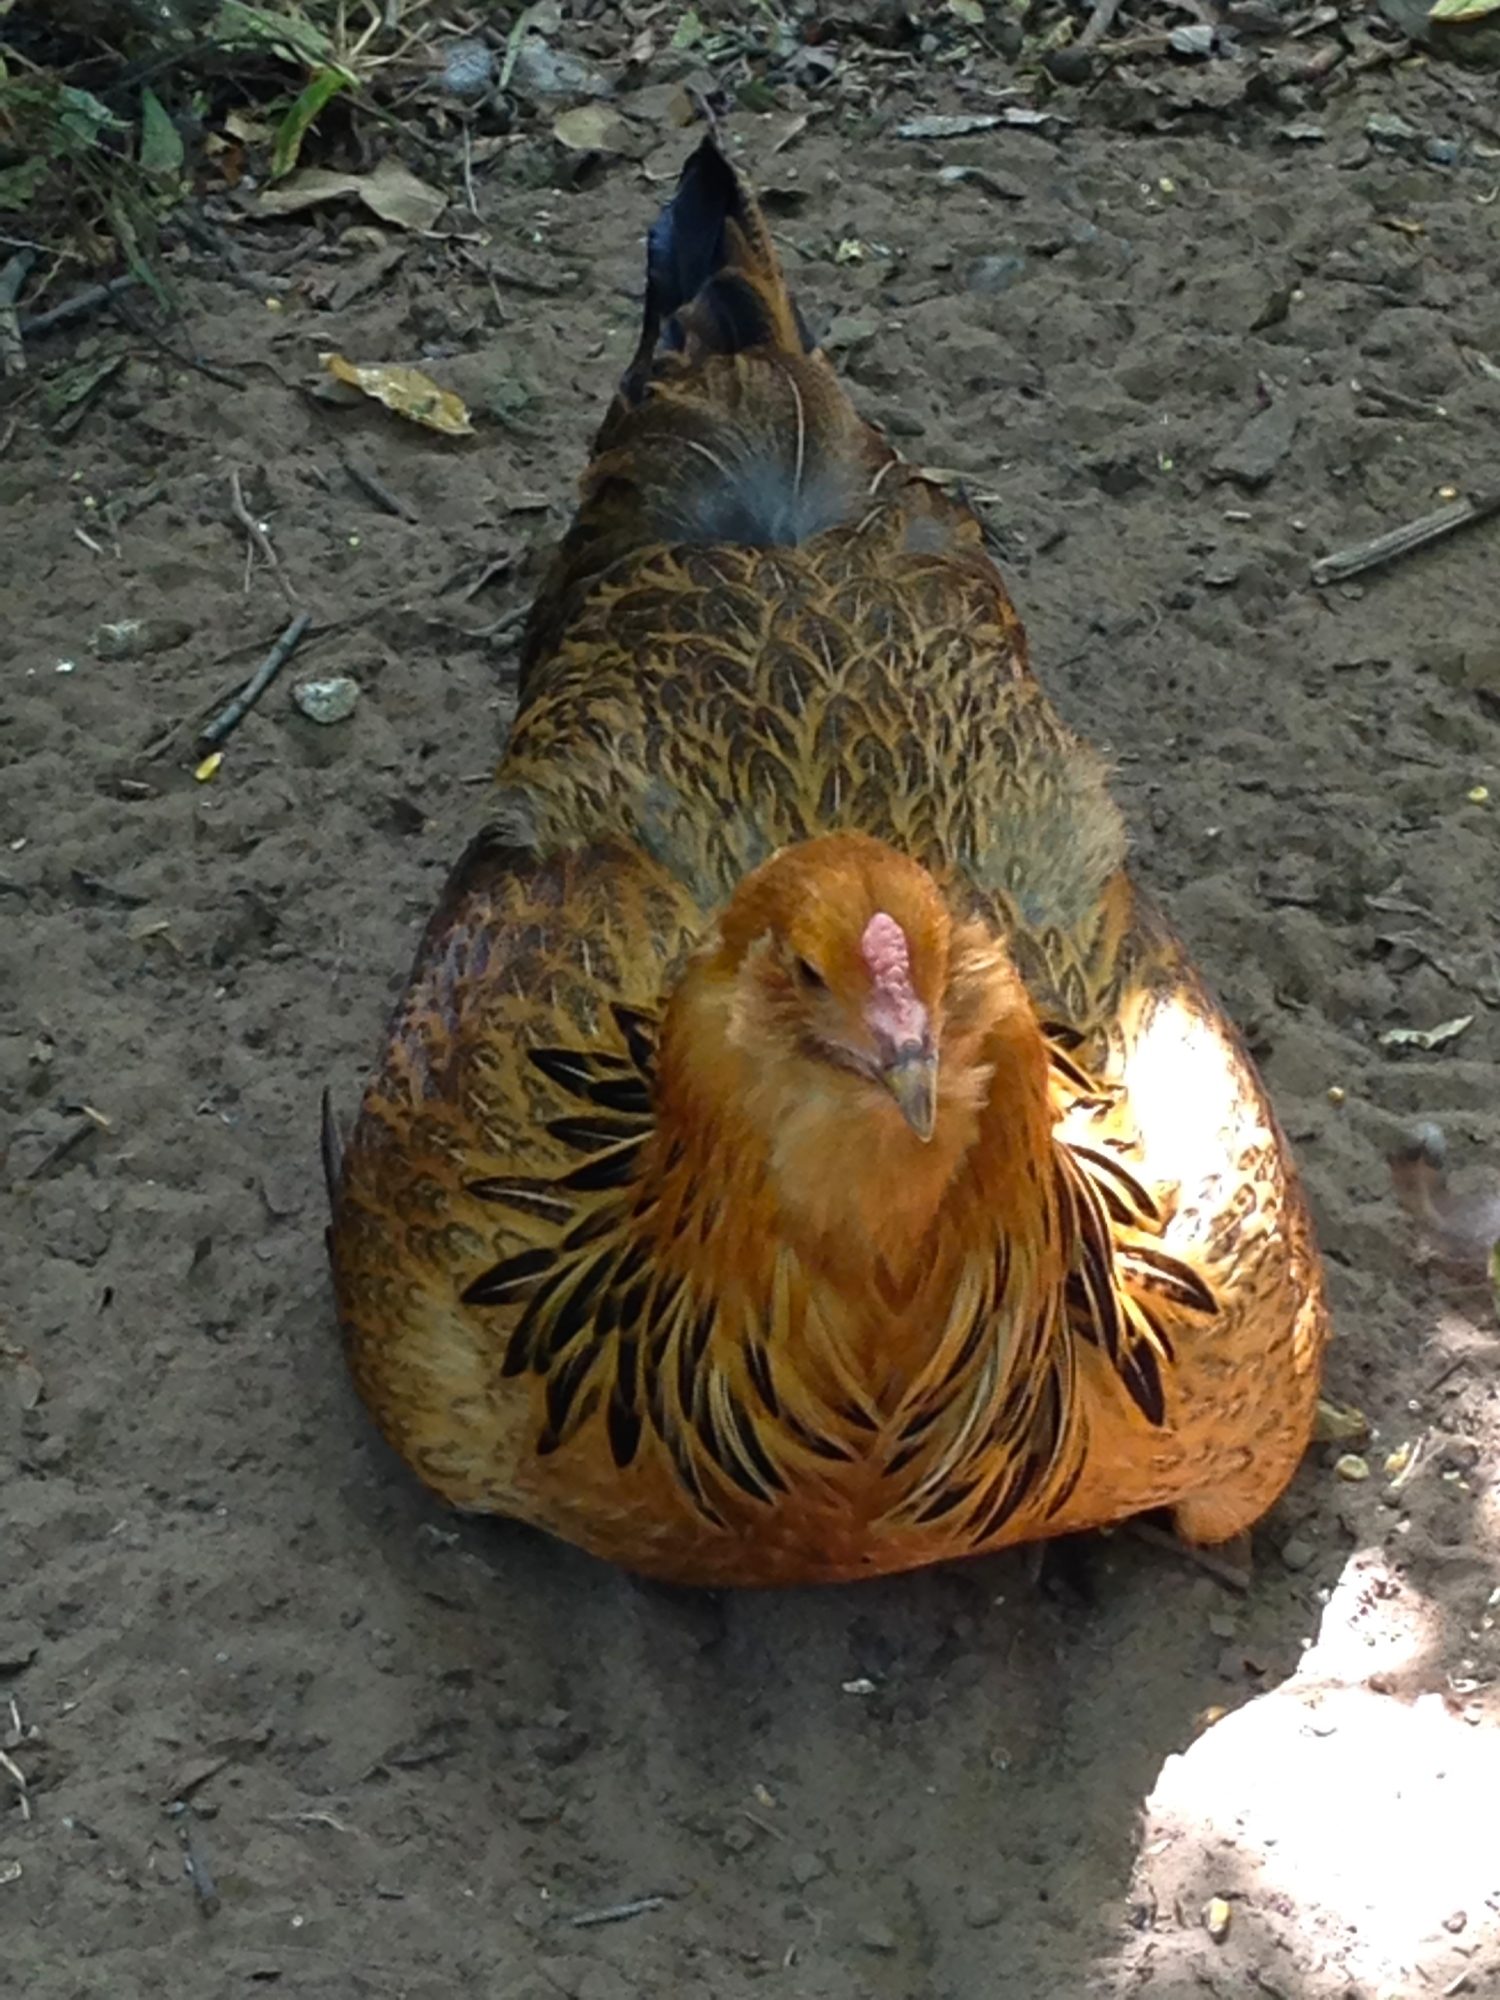 Easter Egger "Beauty".  She is very calm and sweet and completely beautiful